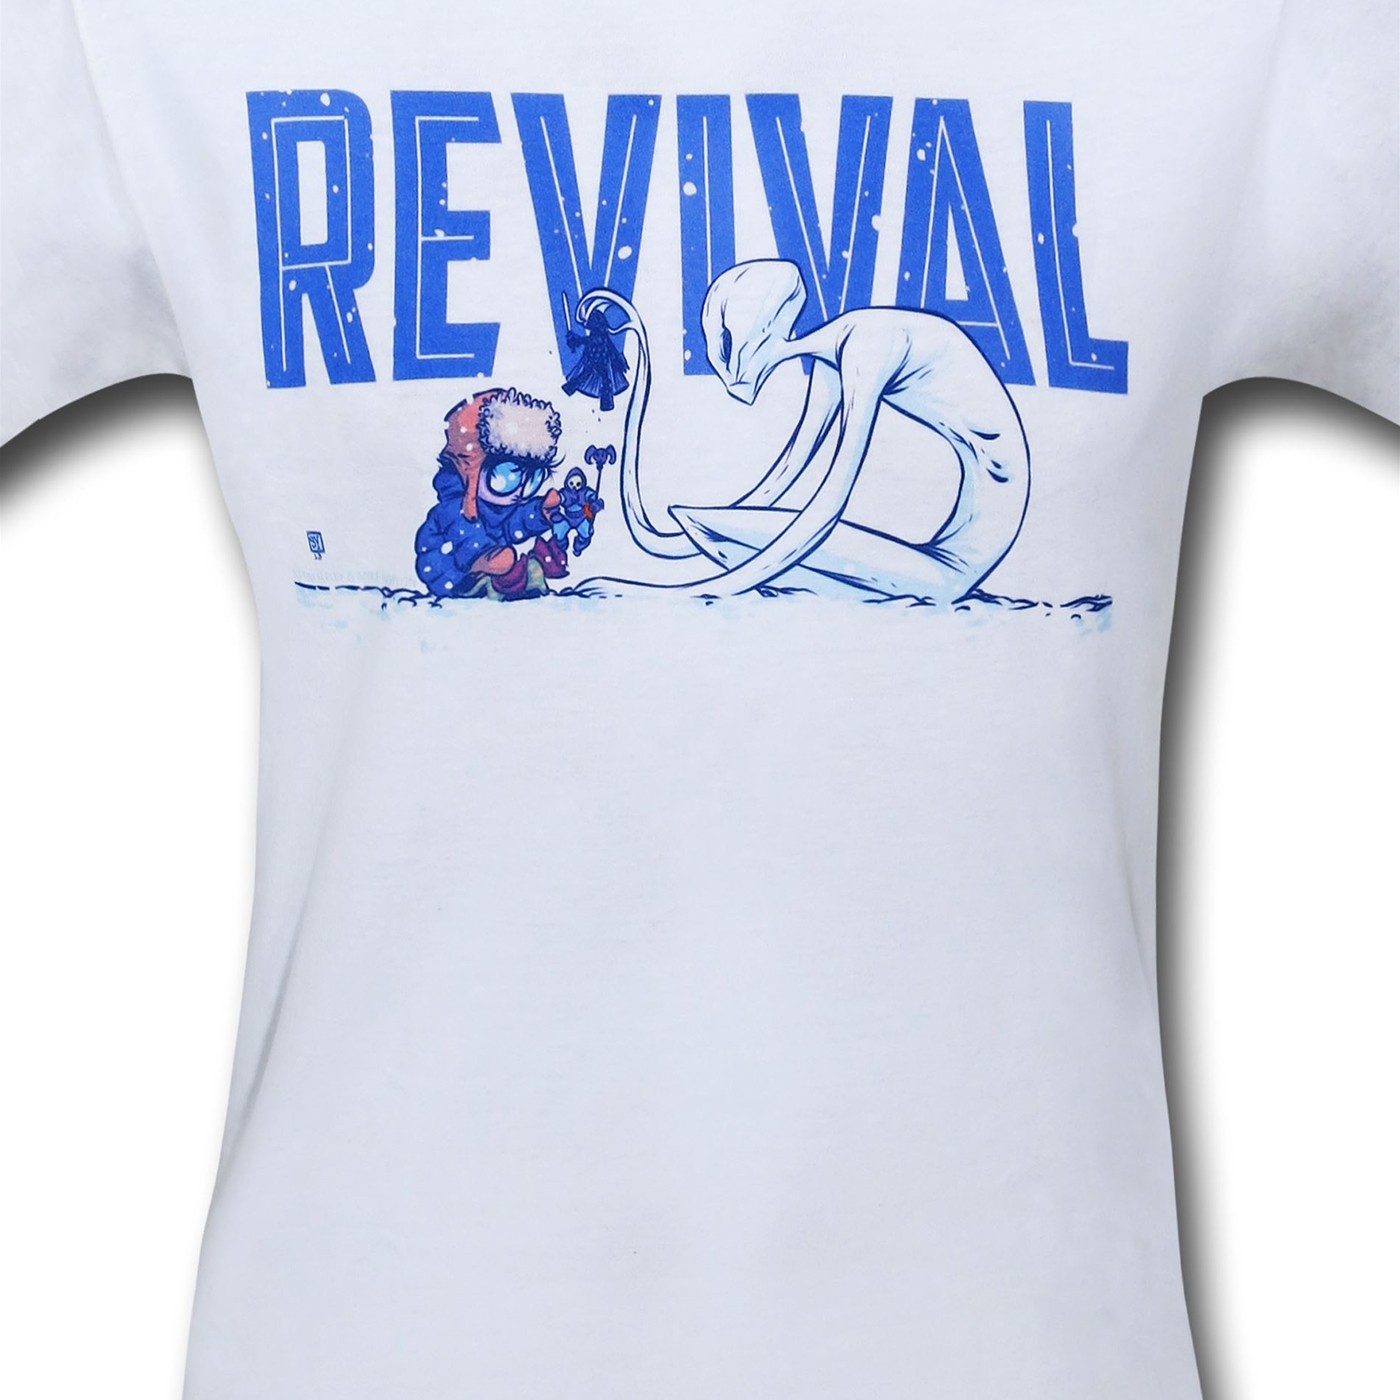 Revival Snow Day T-Shirt